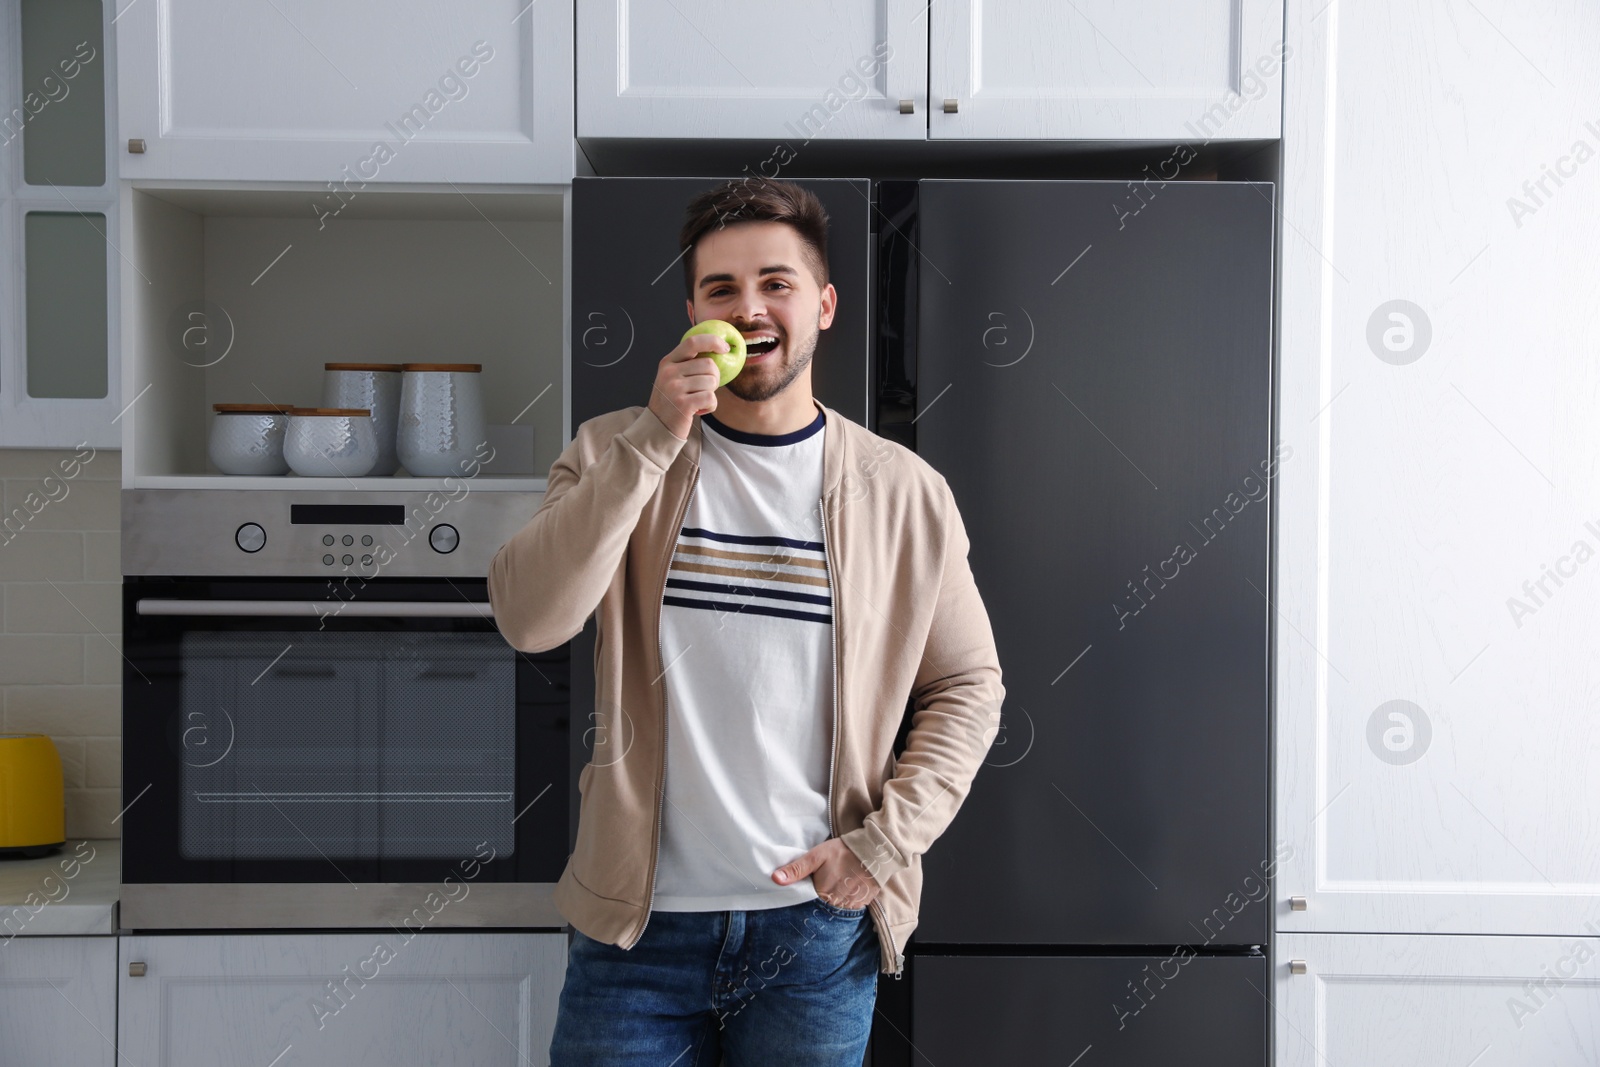 Photo of Young man eating apple near refrigerator in kitchen